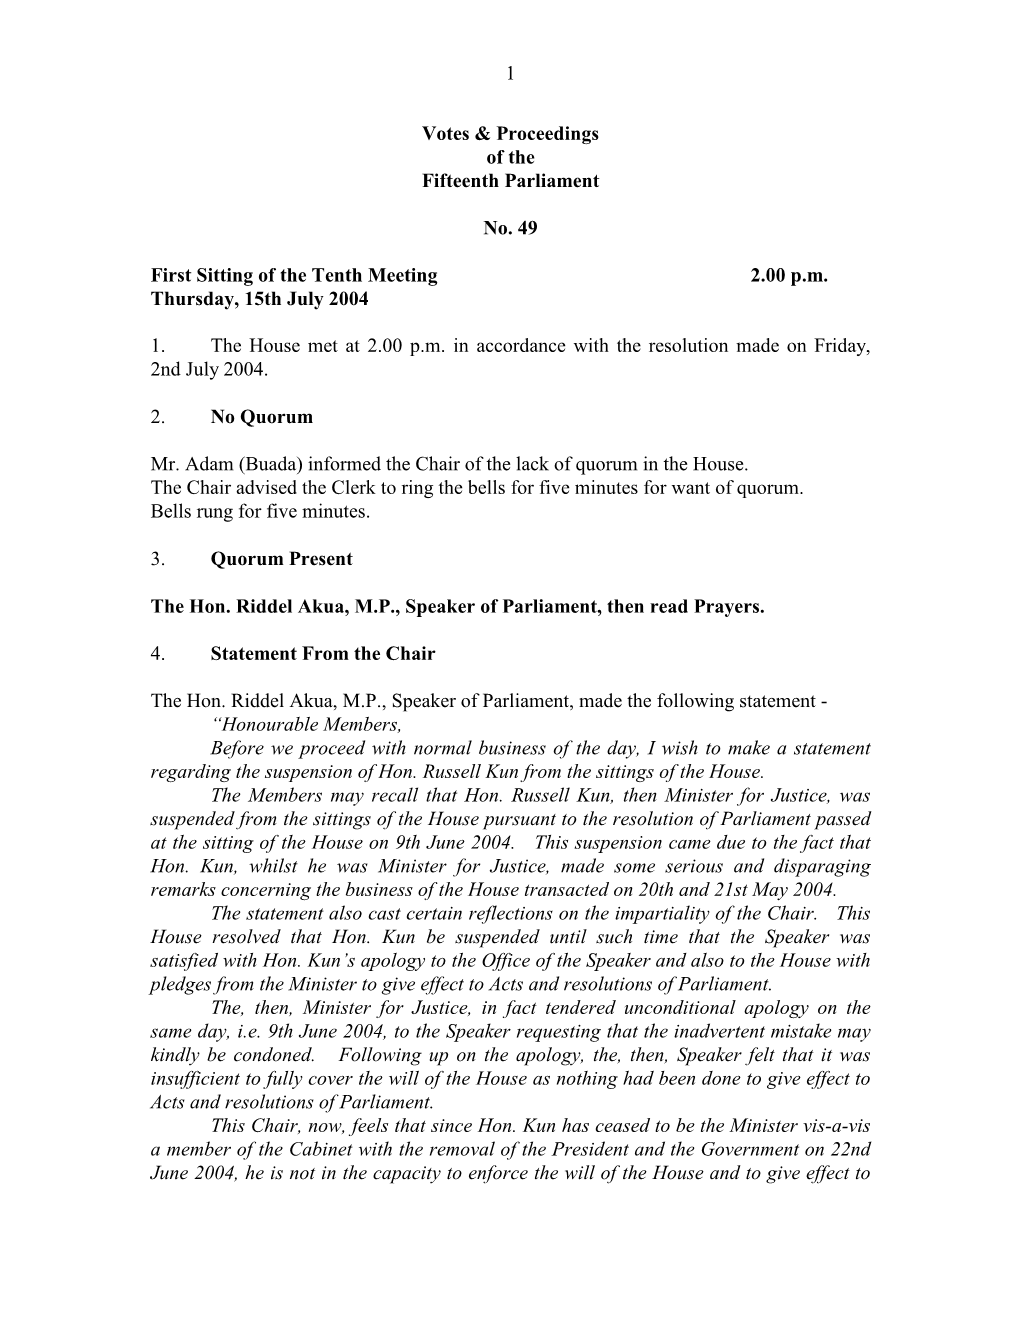 1 Votes & Proceedings of the Fifteenth Parliament No. 49 First Sitting Of